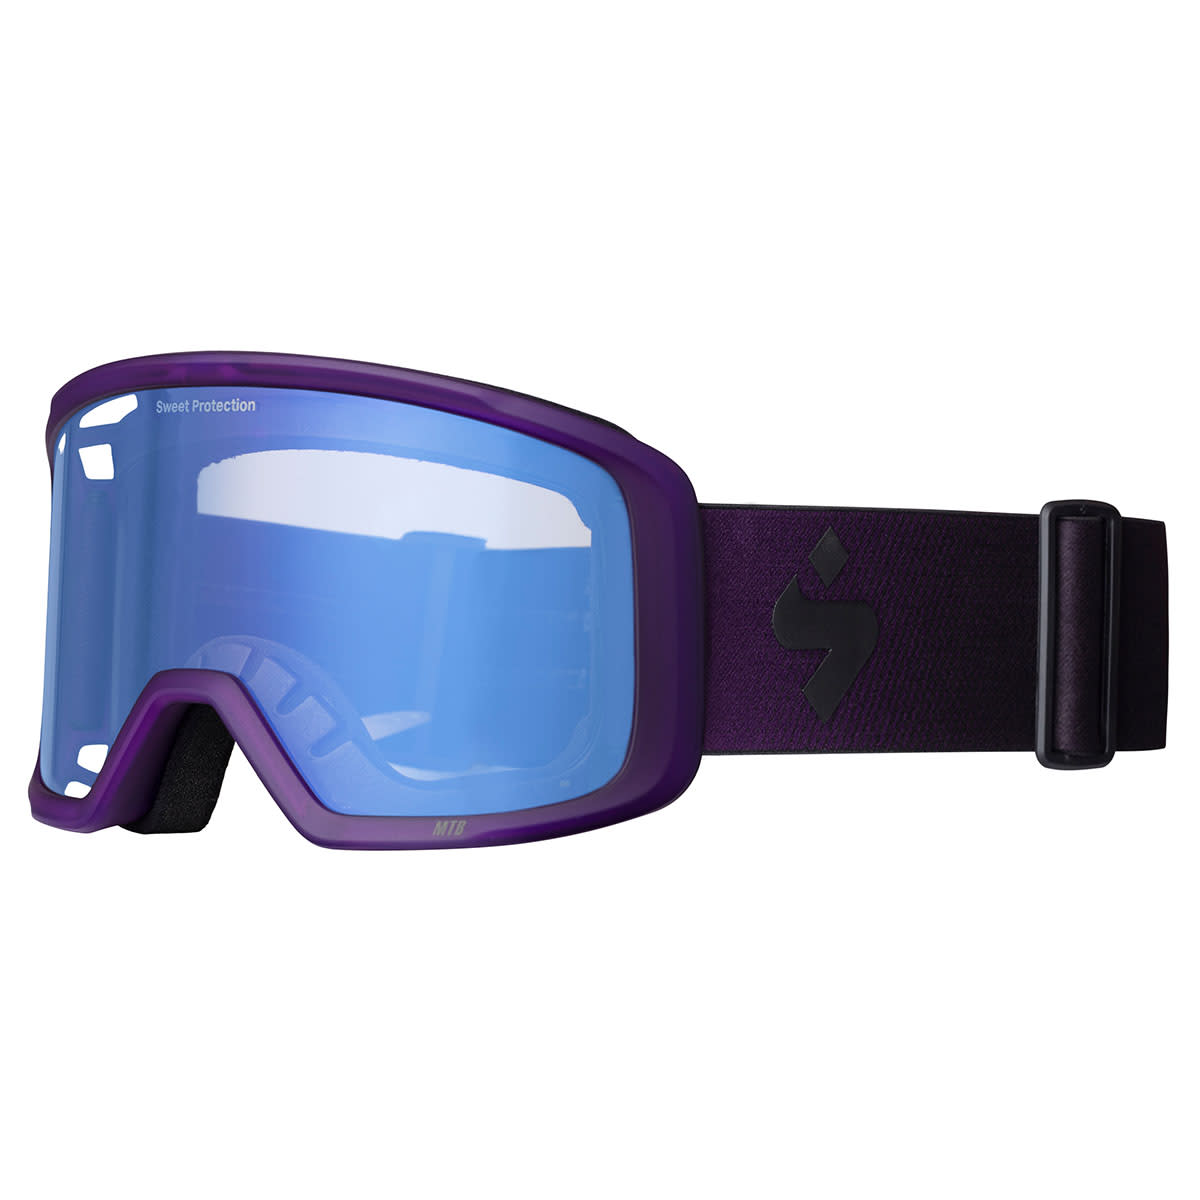 Sweet Protection Firewall MTB Goggles